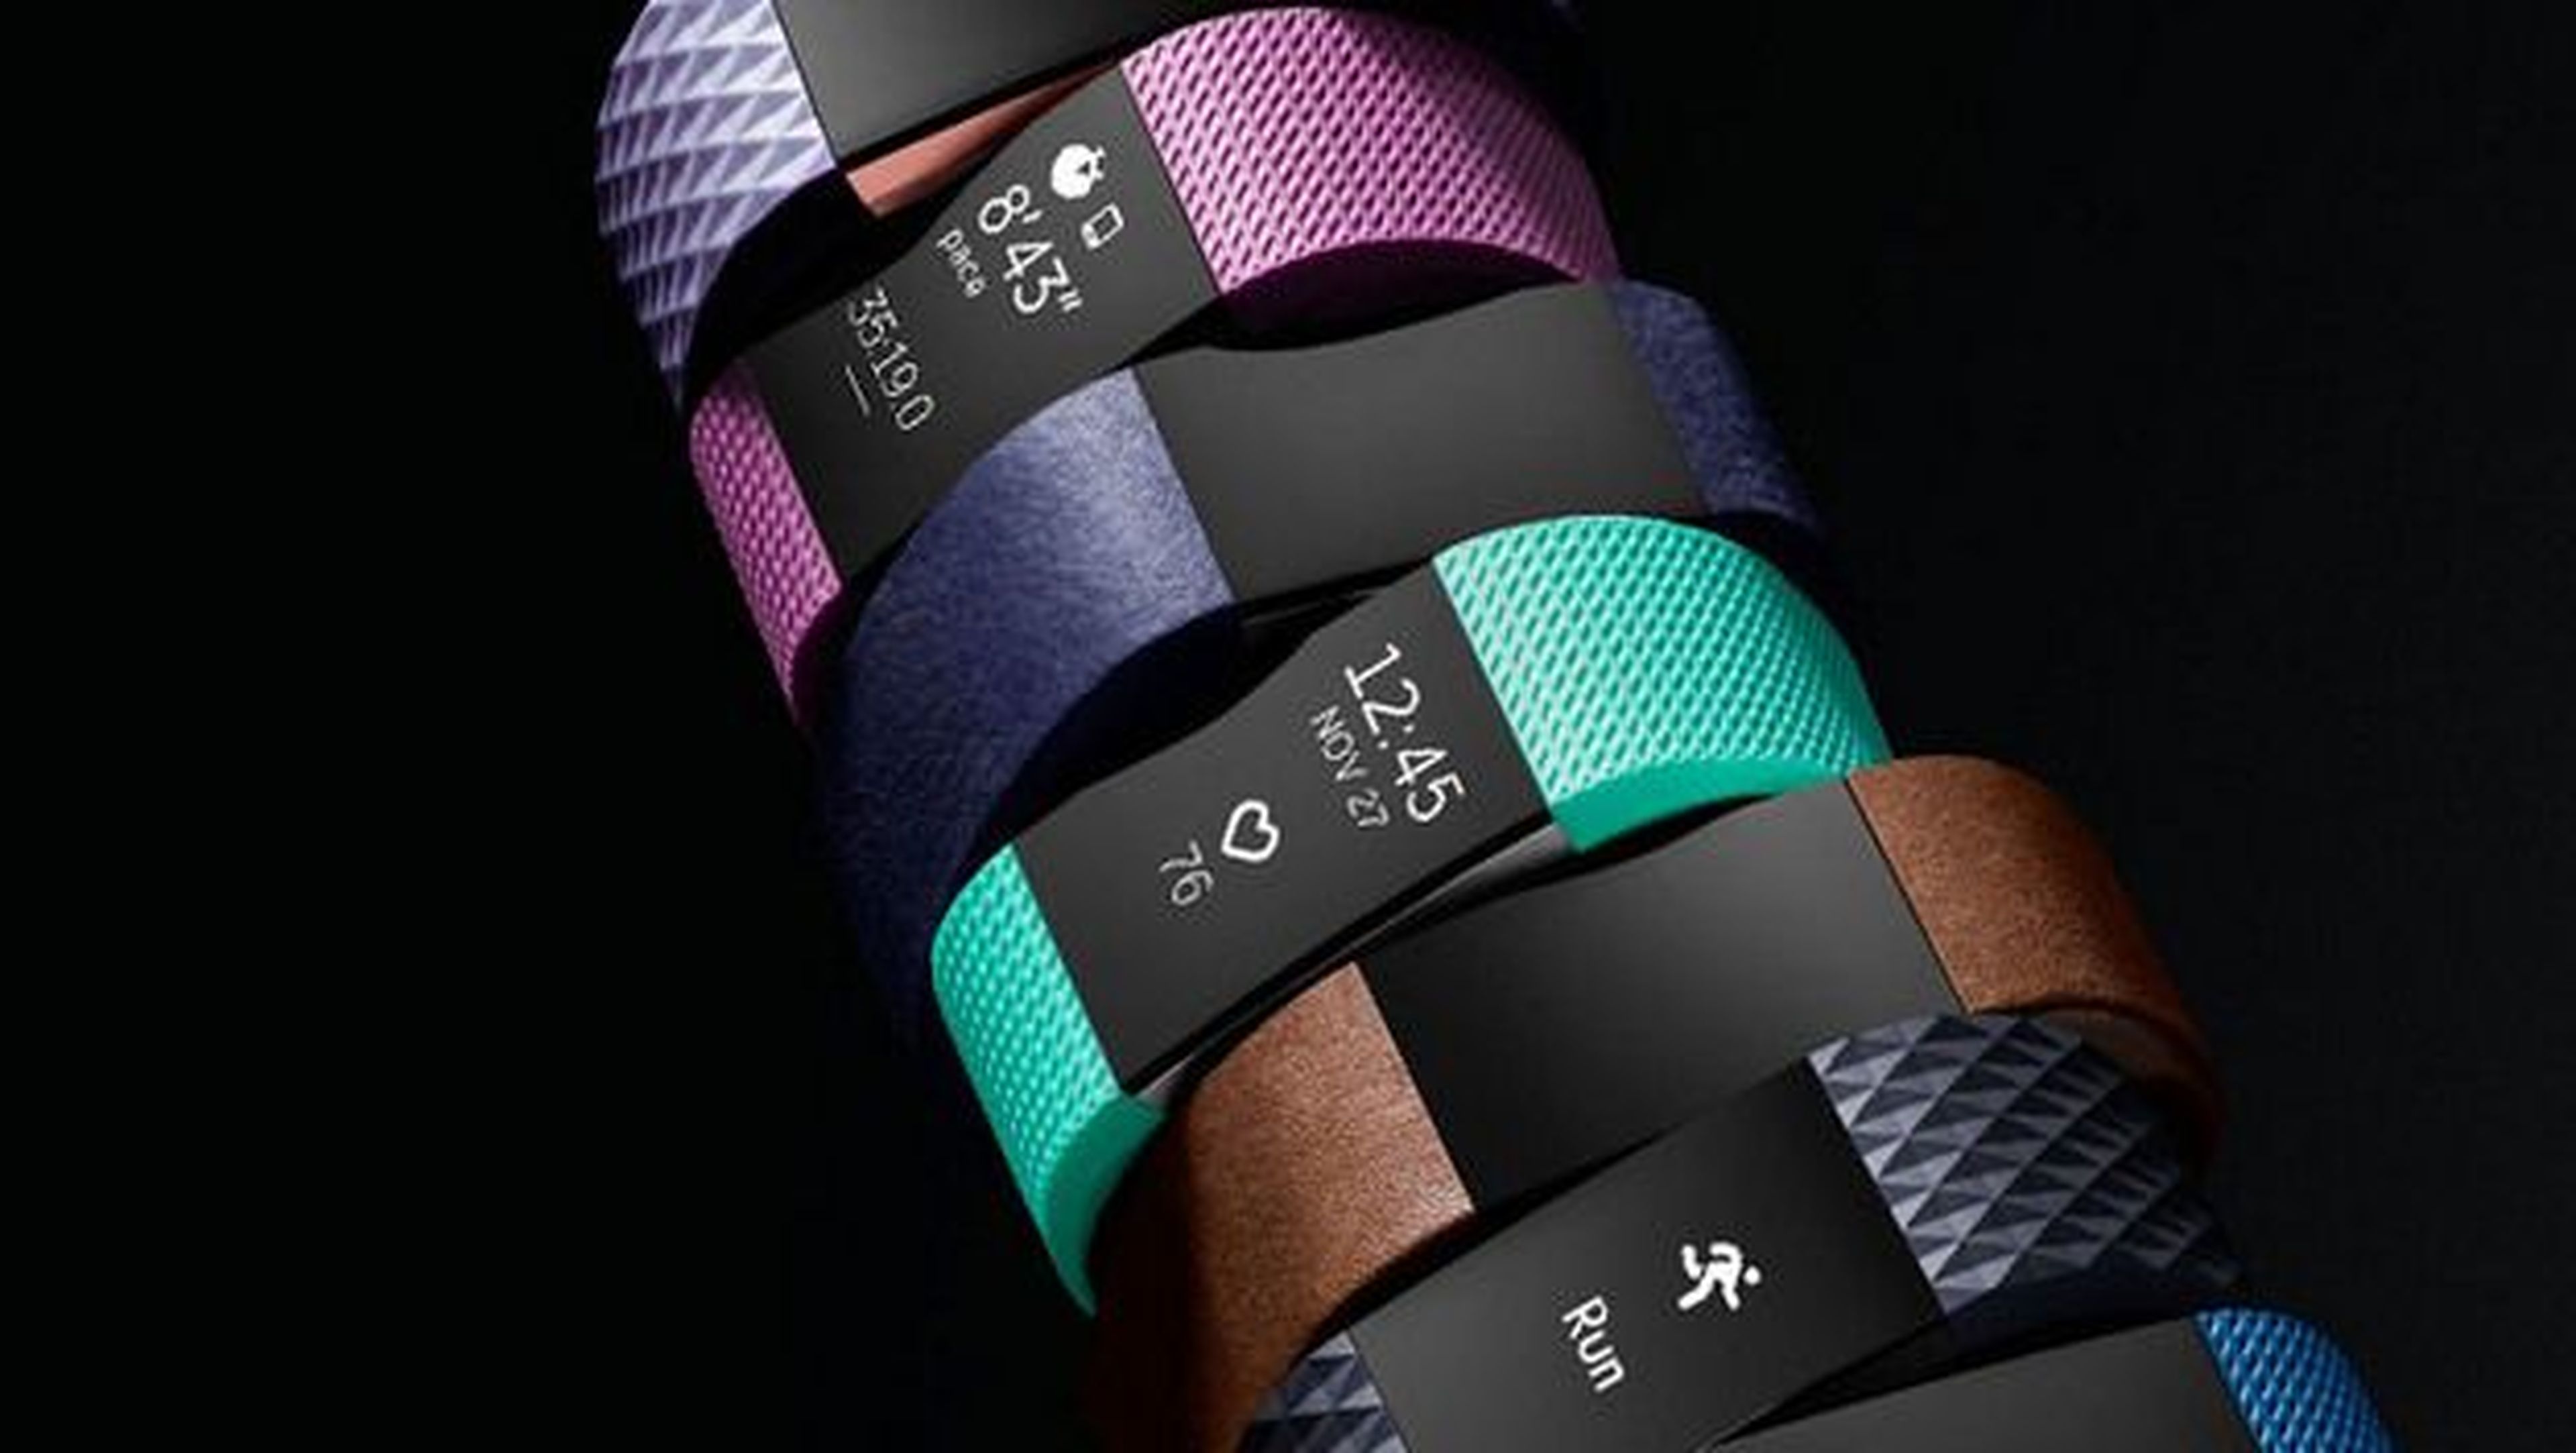 FitBit Flex 2 y FitBit Charge 2